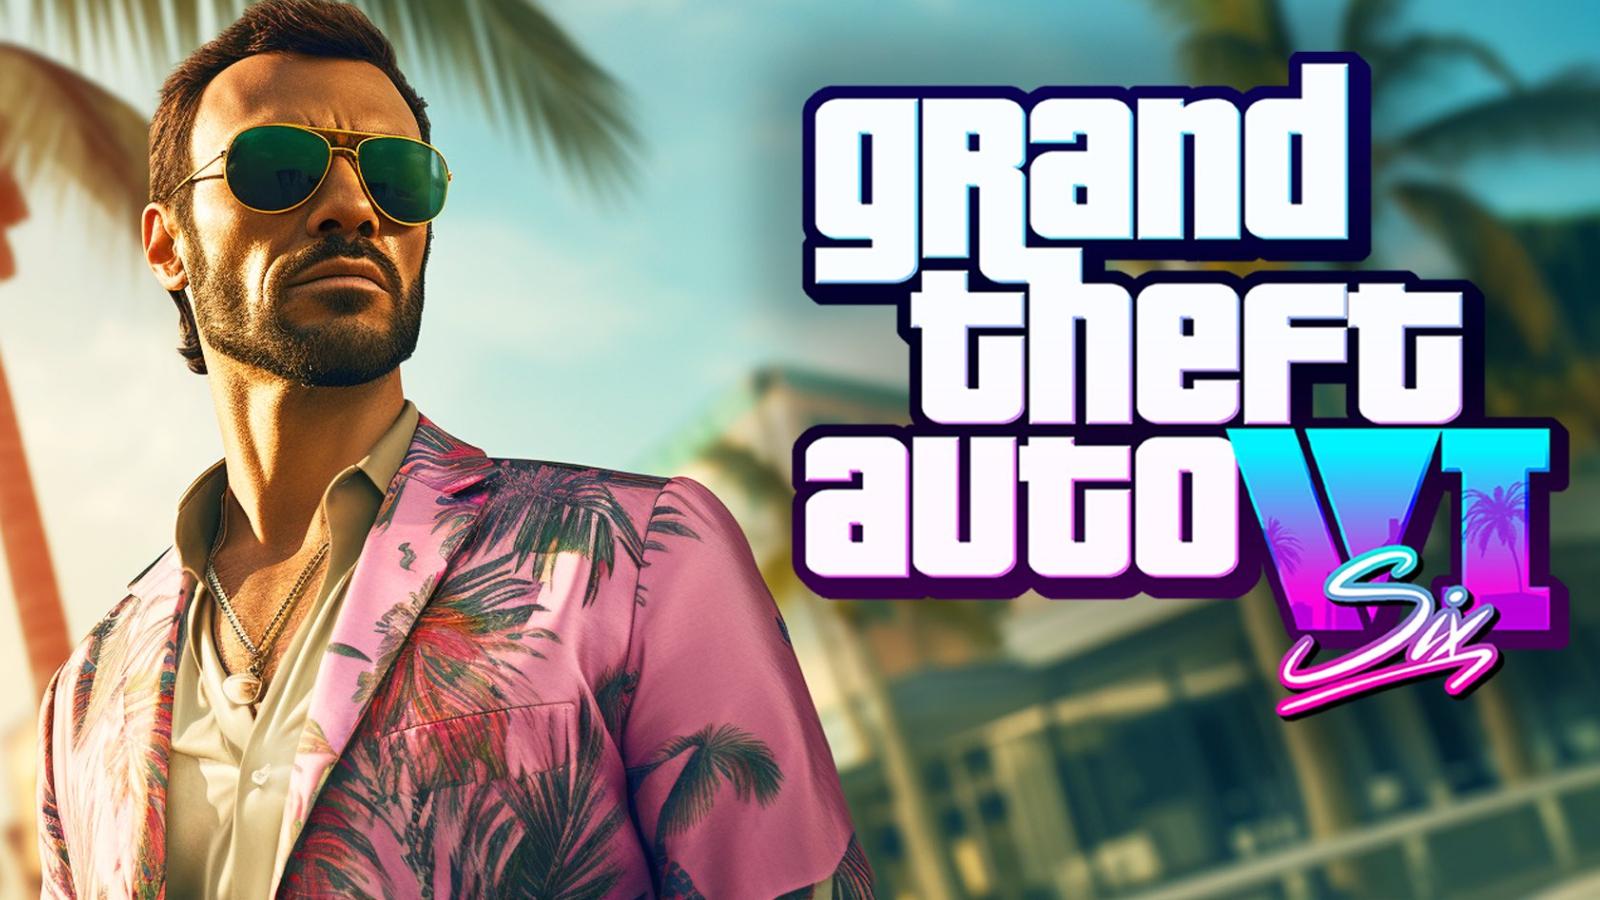 Take-Two Interactive Boss Has Hinted At GTA 6 Release Date - Gameranx